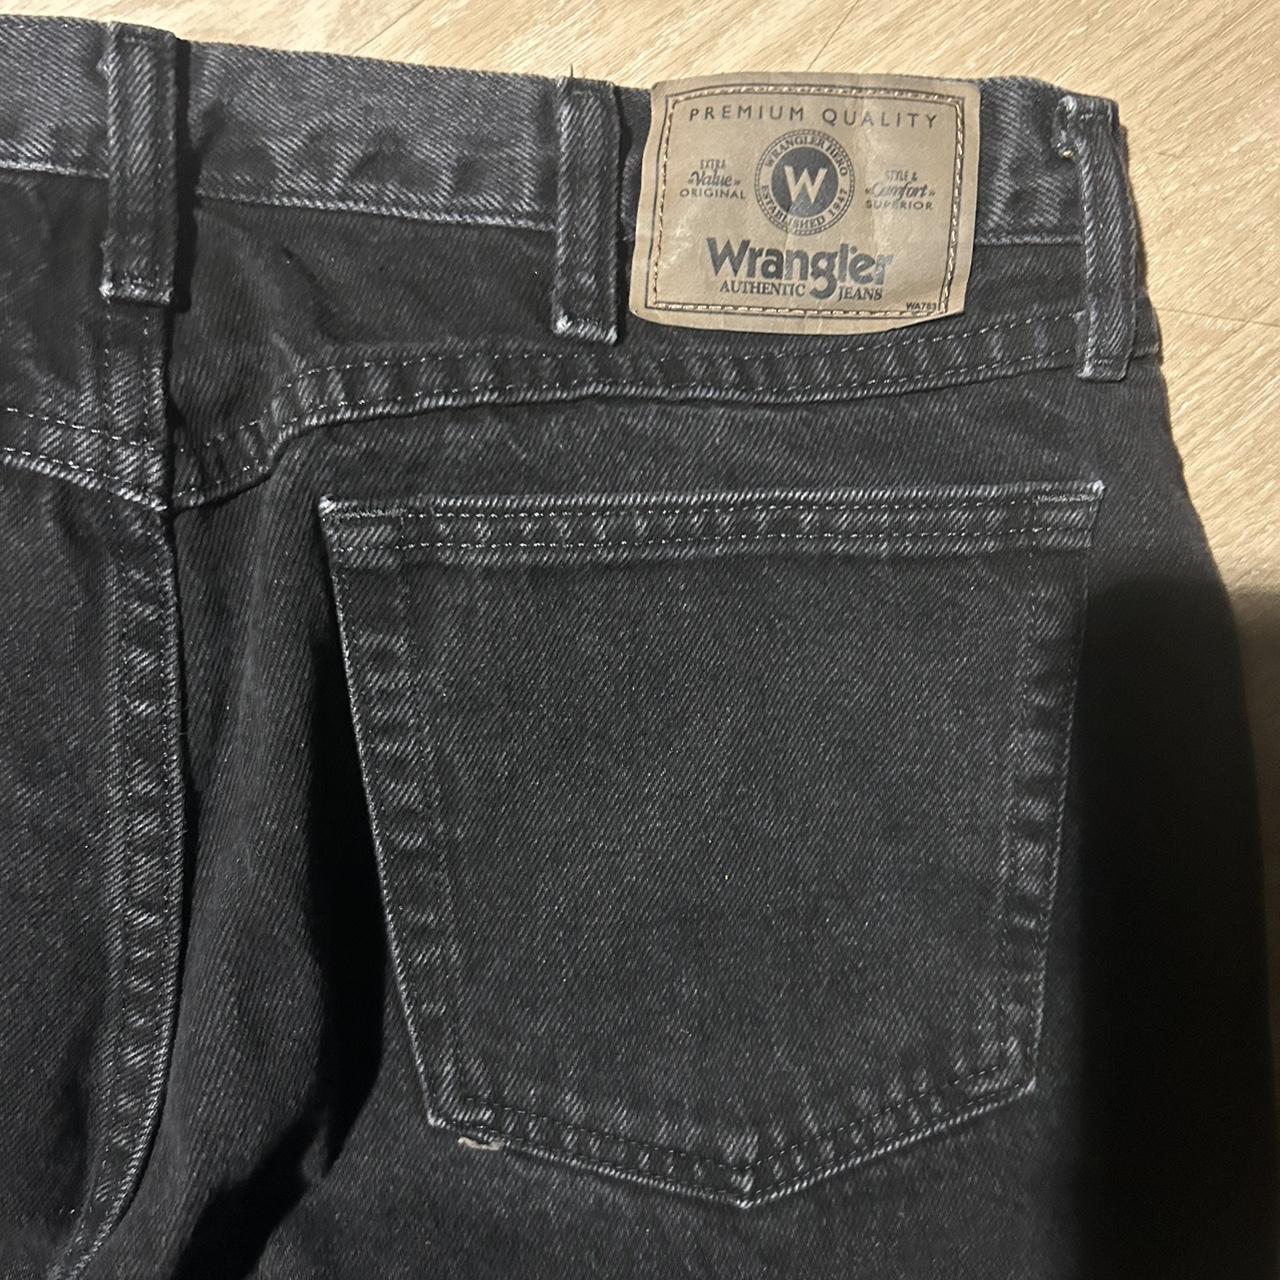 wrangler relaxed fit black jeans 📏36x30 relaxed... - Depop